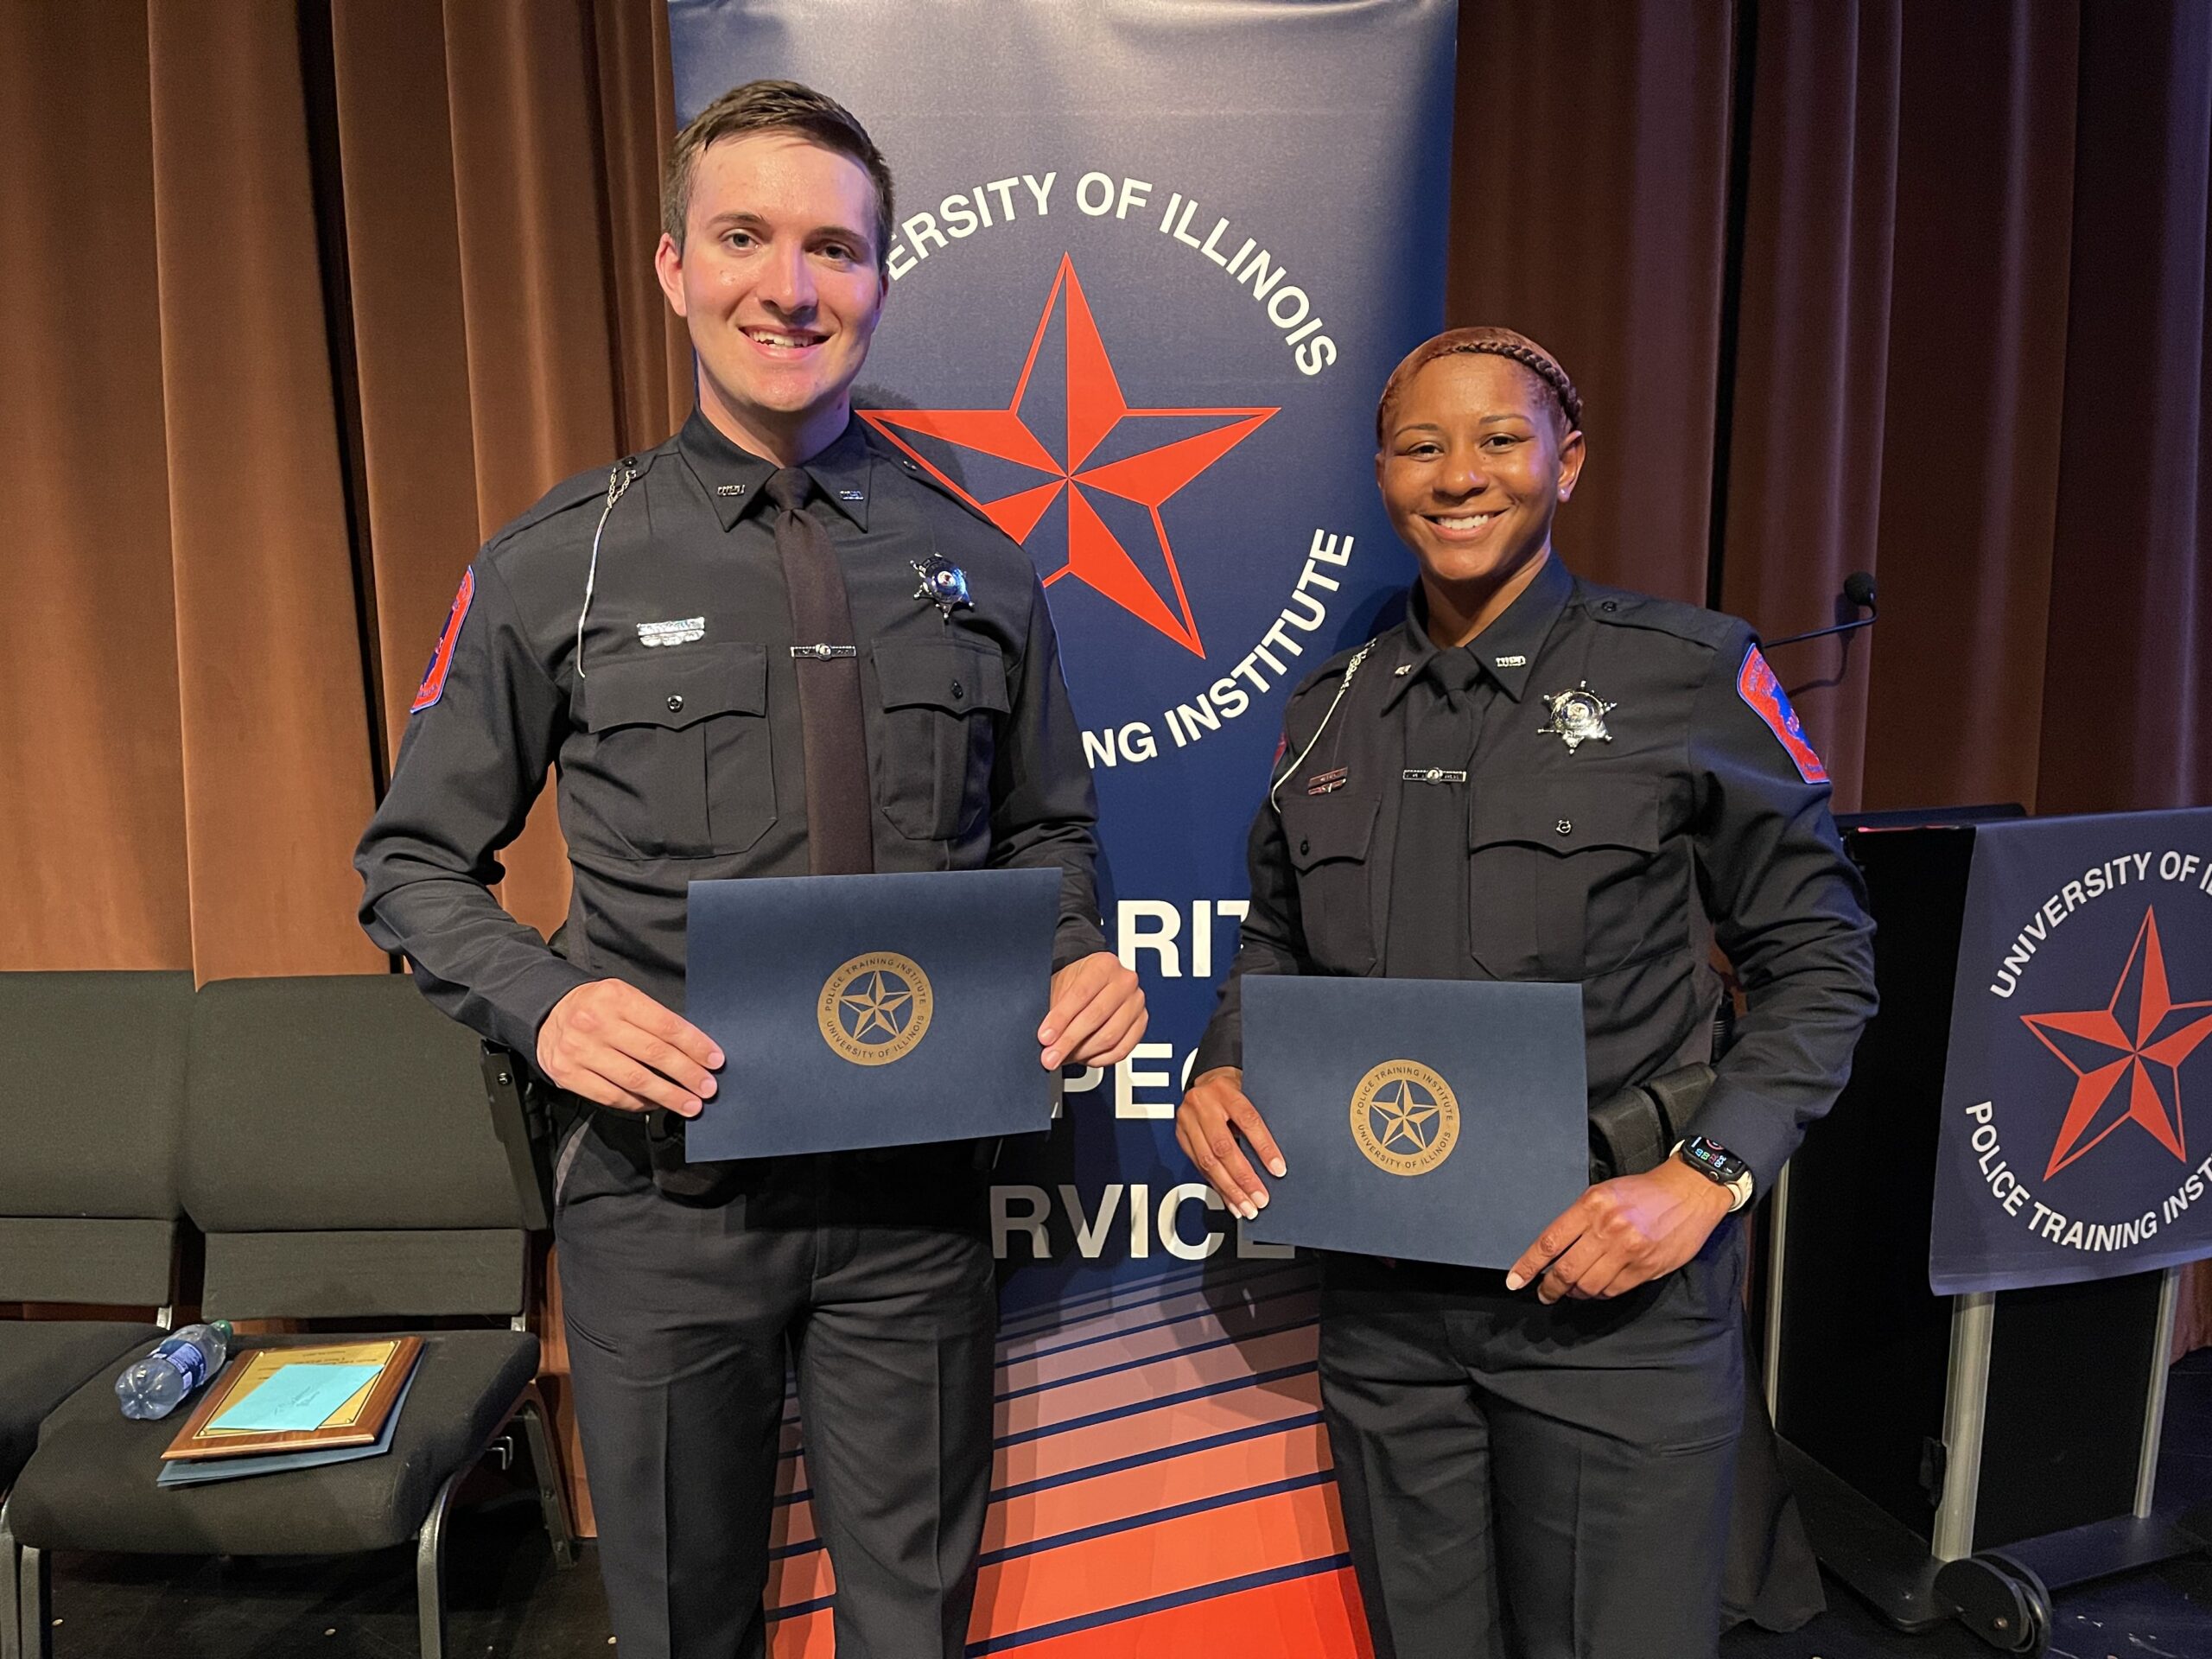 Two police officers pose for a photo with certificates